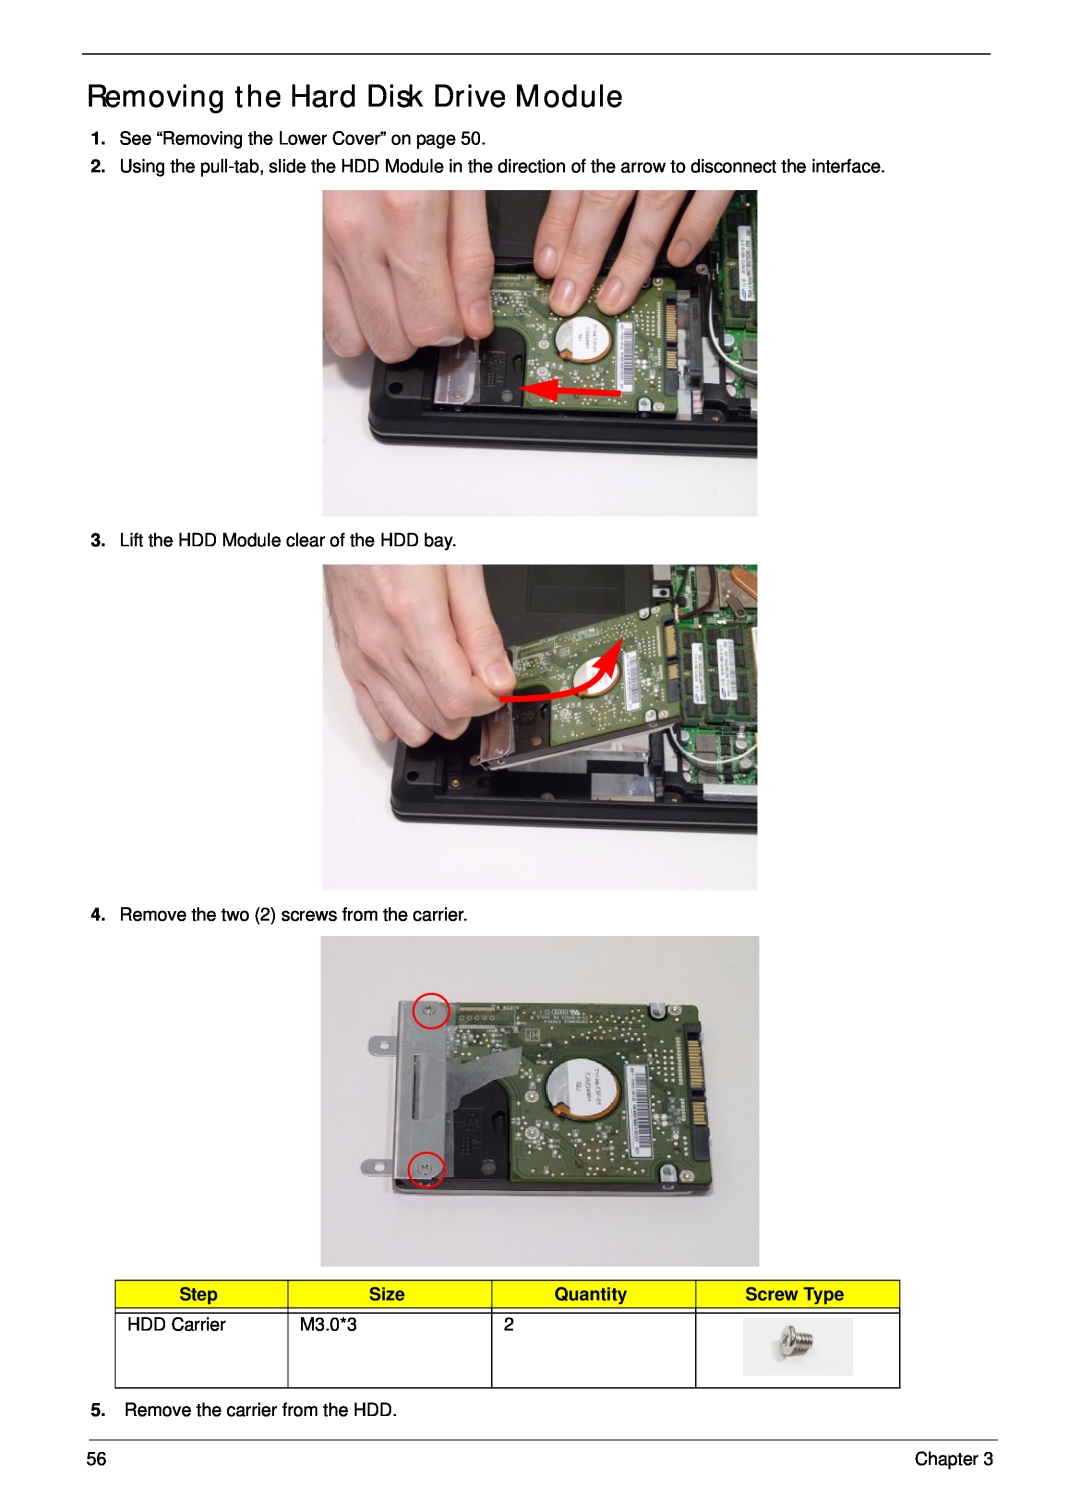 Aspire Digital 4625G Removing the Hard Disk Drive Module, Step, Size, Quantity, Screw Type, HDD Carrier, M3.0*3, Chapter 